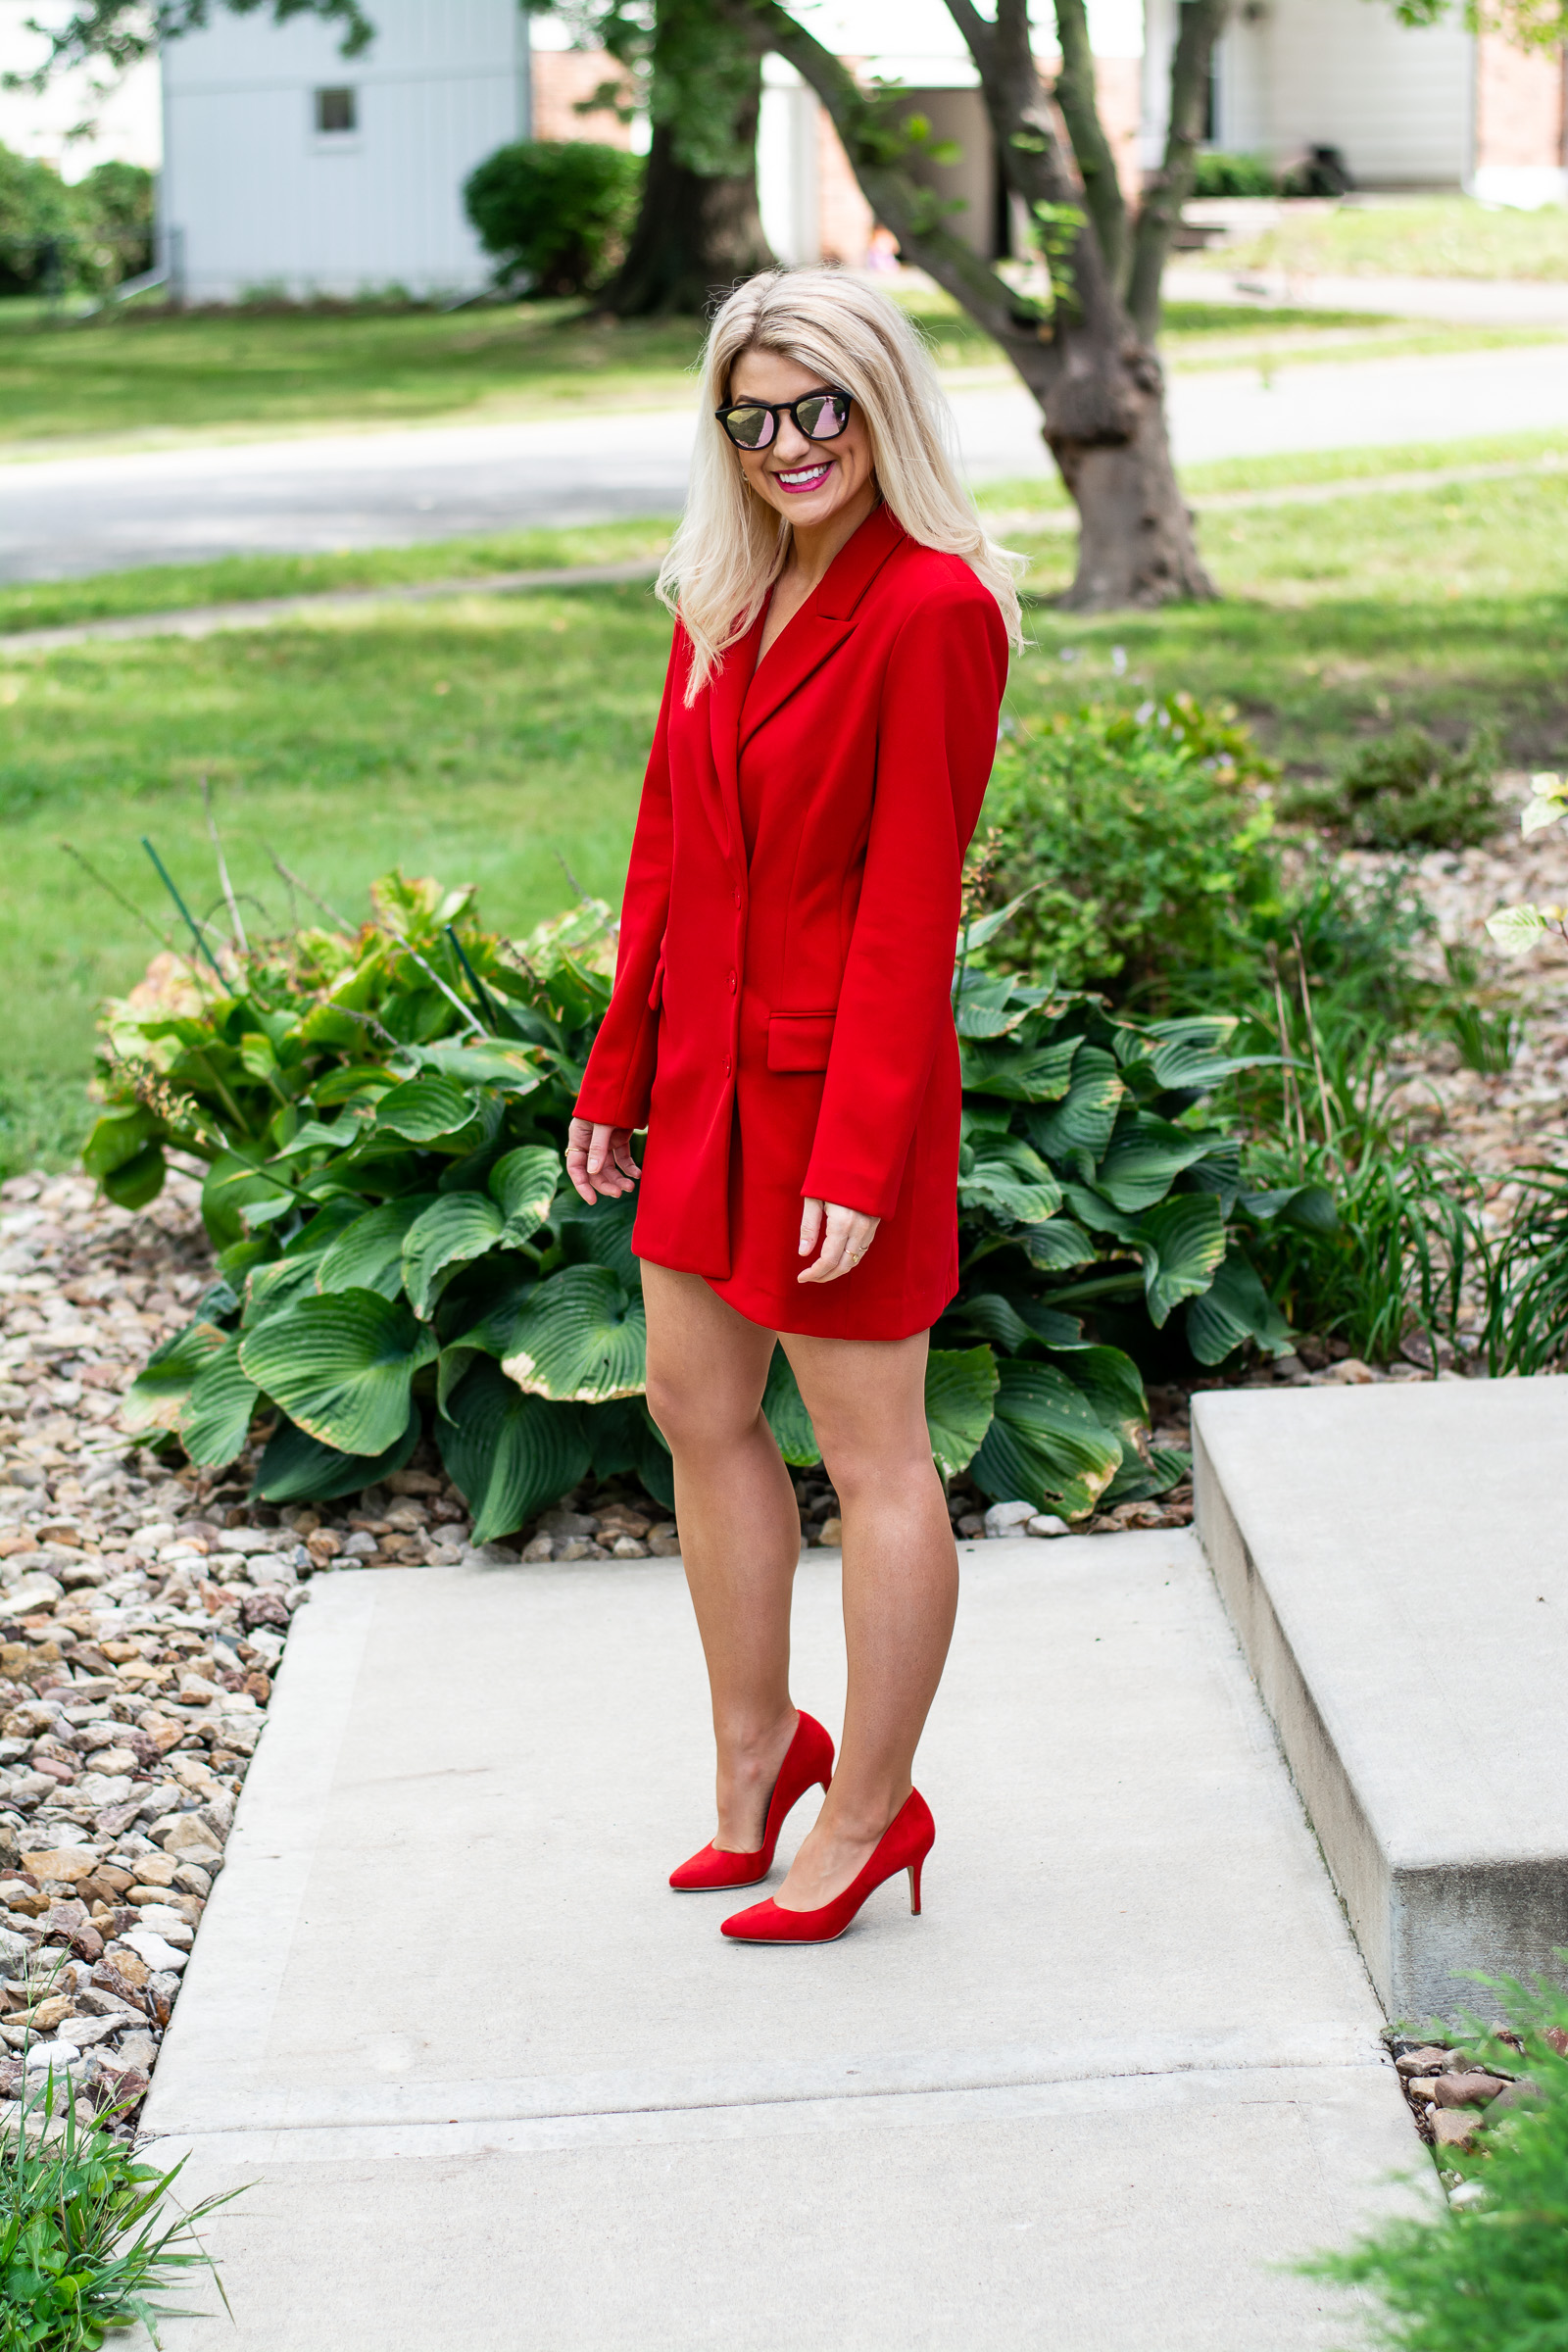 Head-to-toe Red in a Blazer Dress. | Ash from LSR